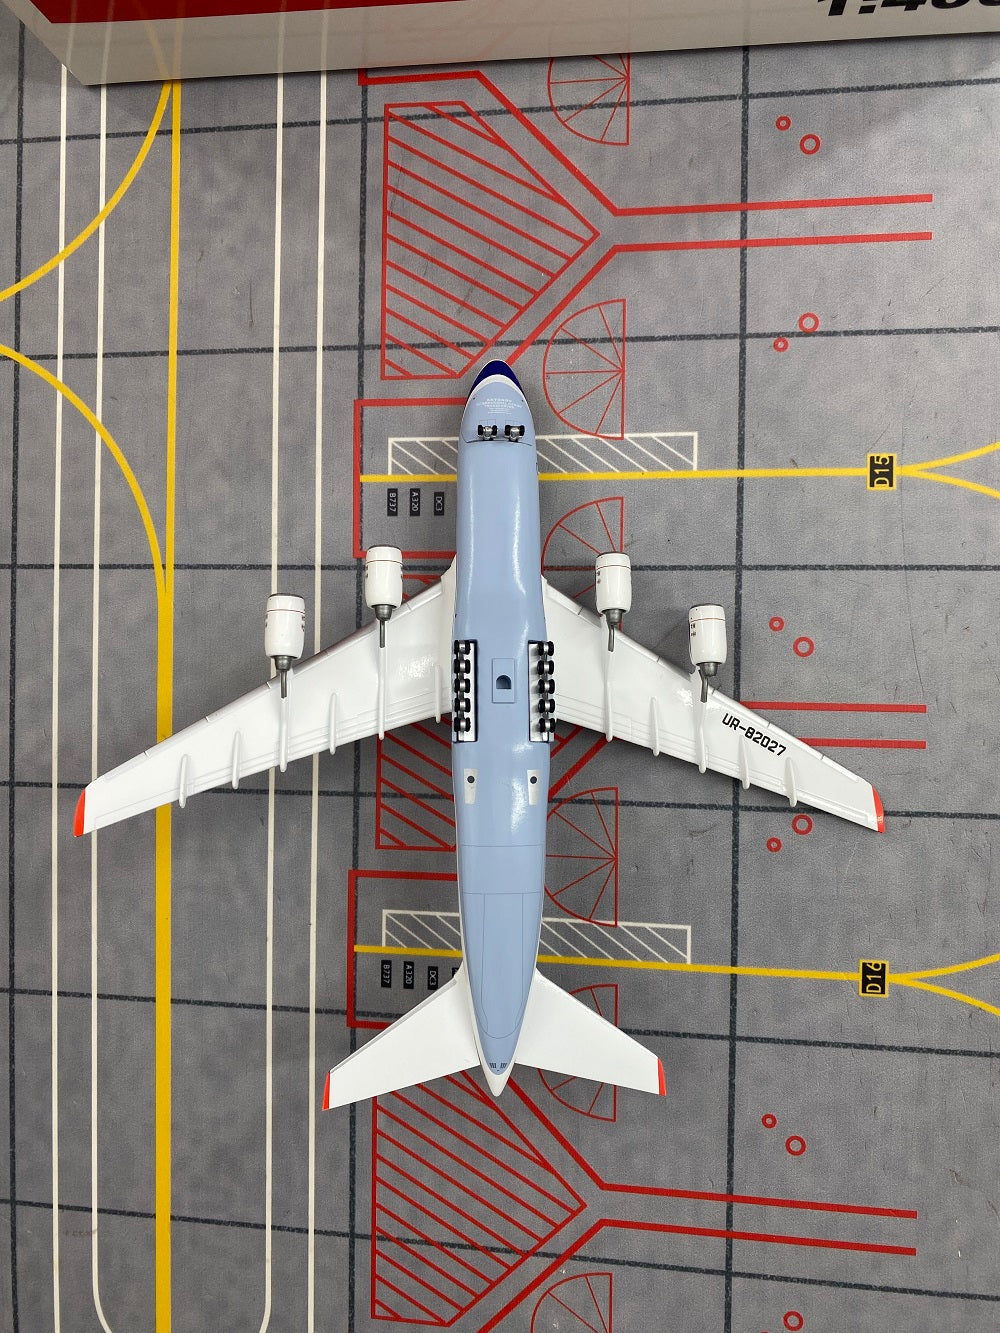 1:400 Blue Wings Antonov An-124 RA-82027 Aircraft Model With Stand